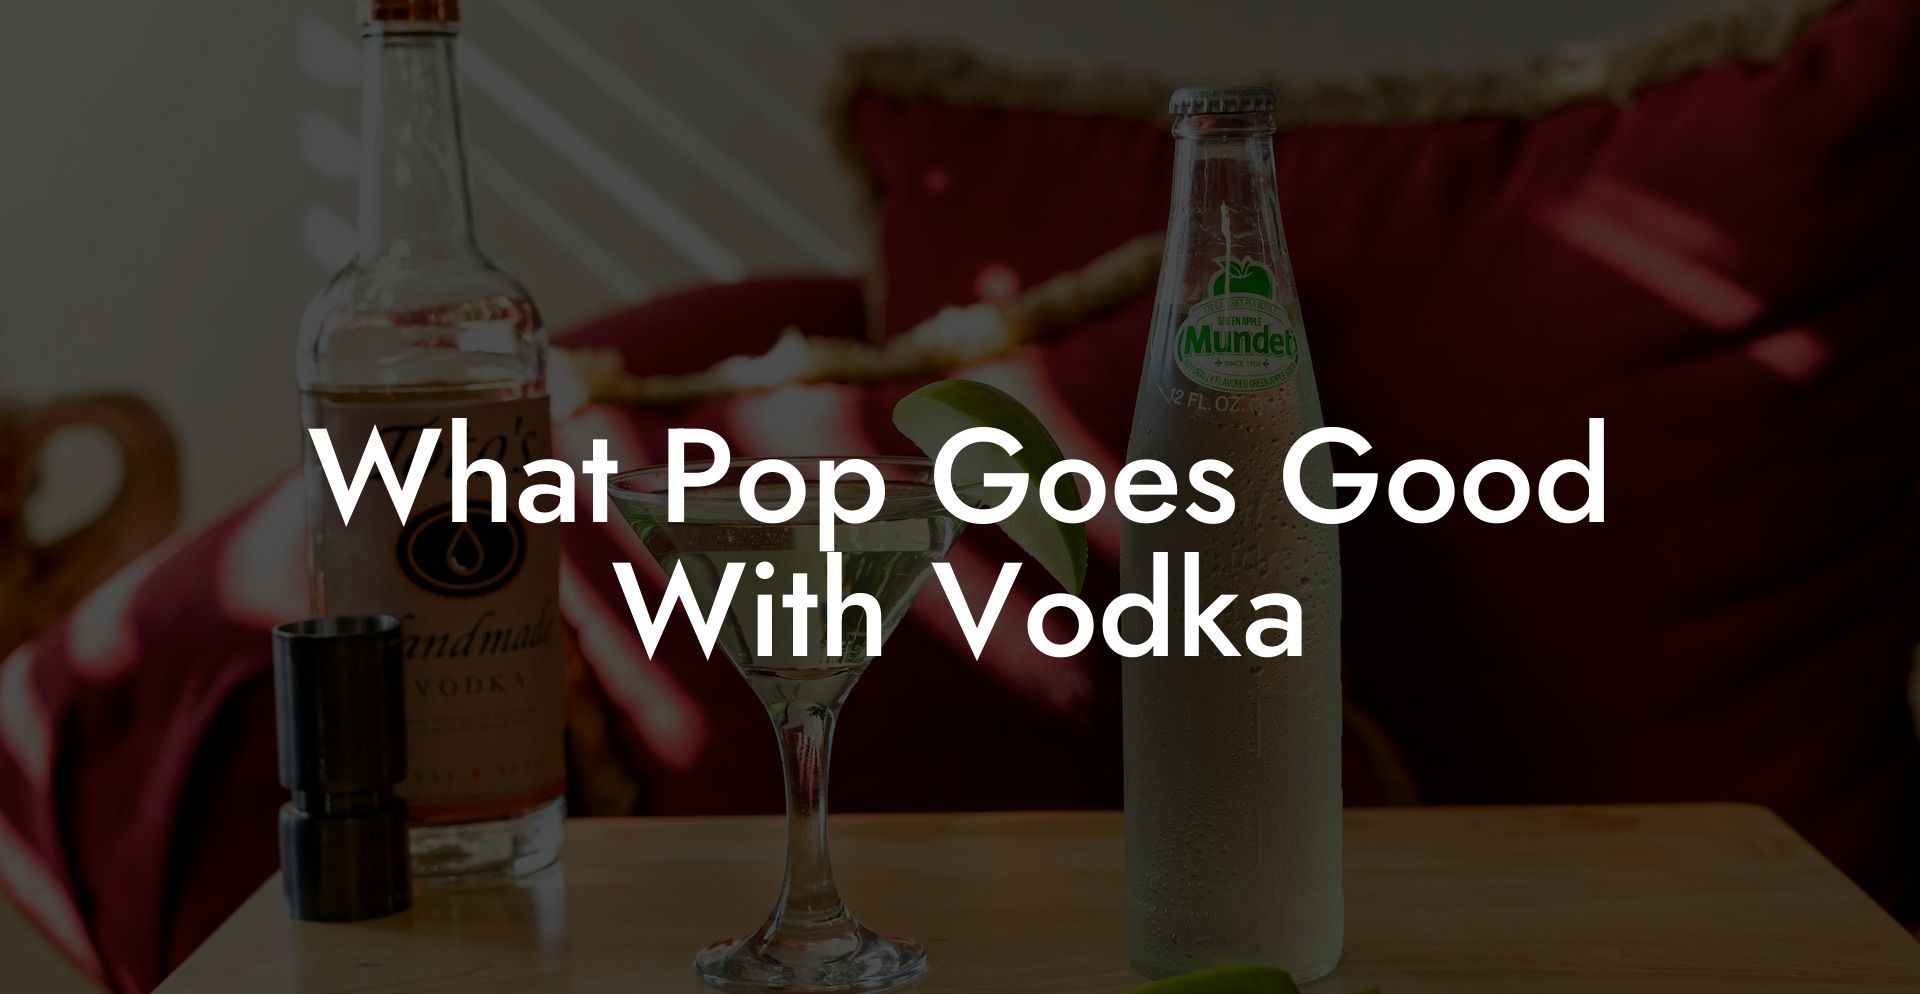 What Pop Goes Good With Vodka